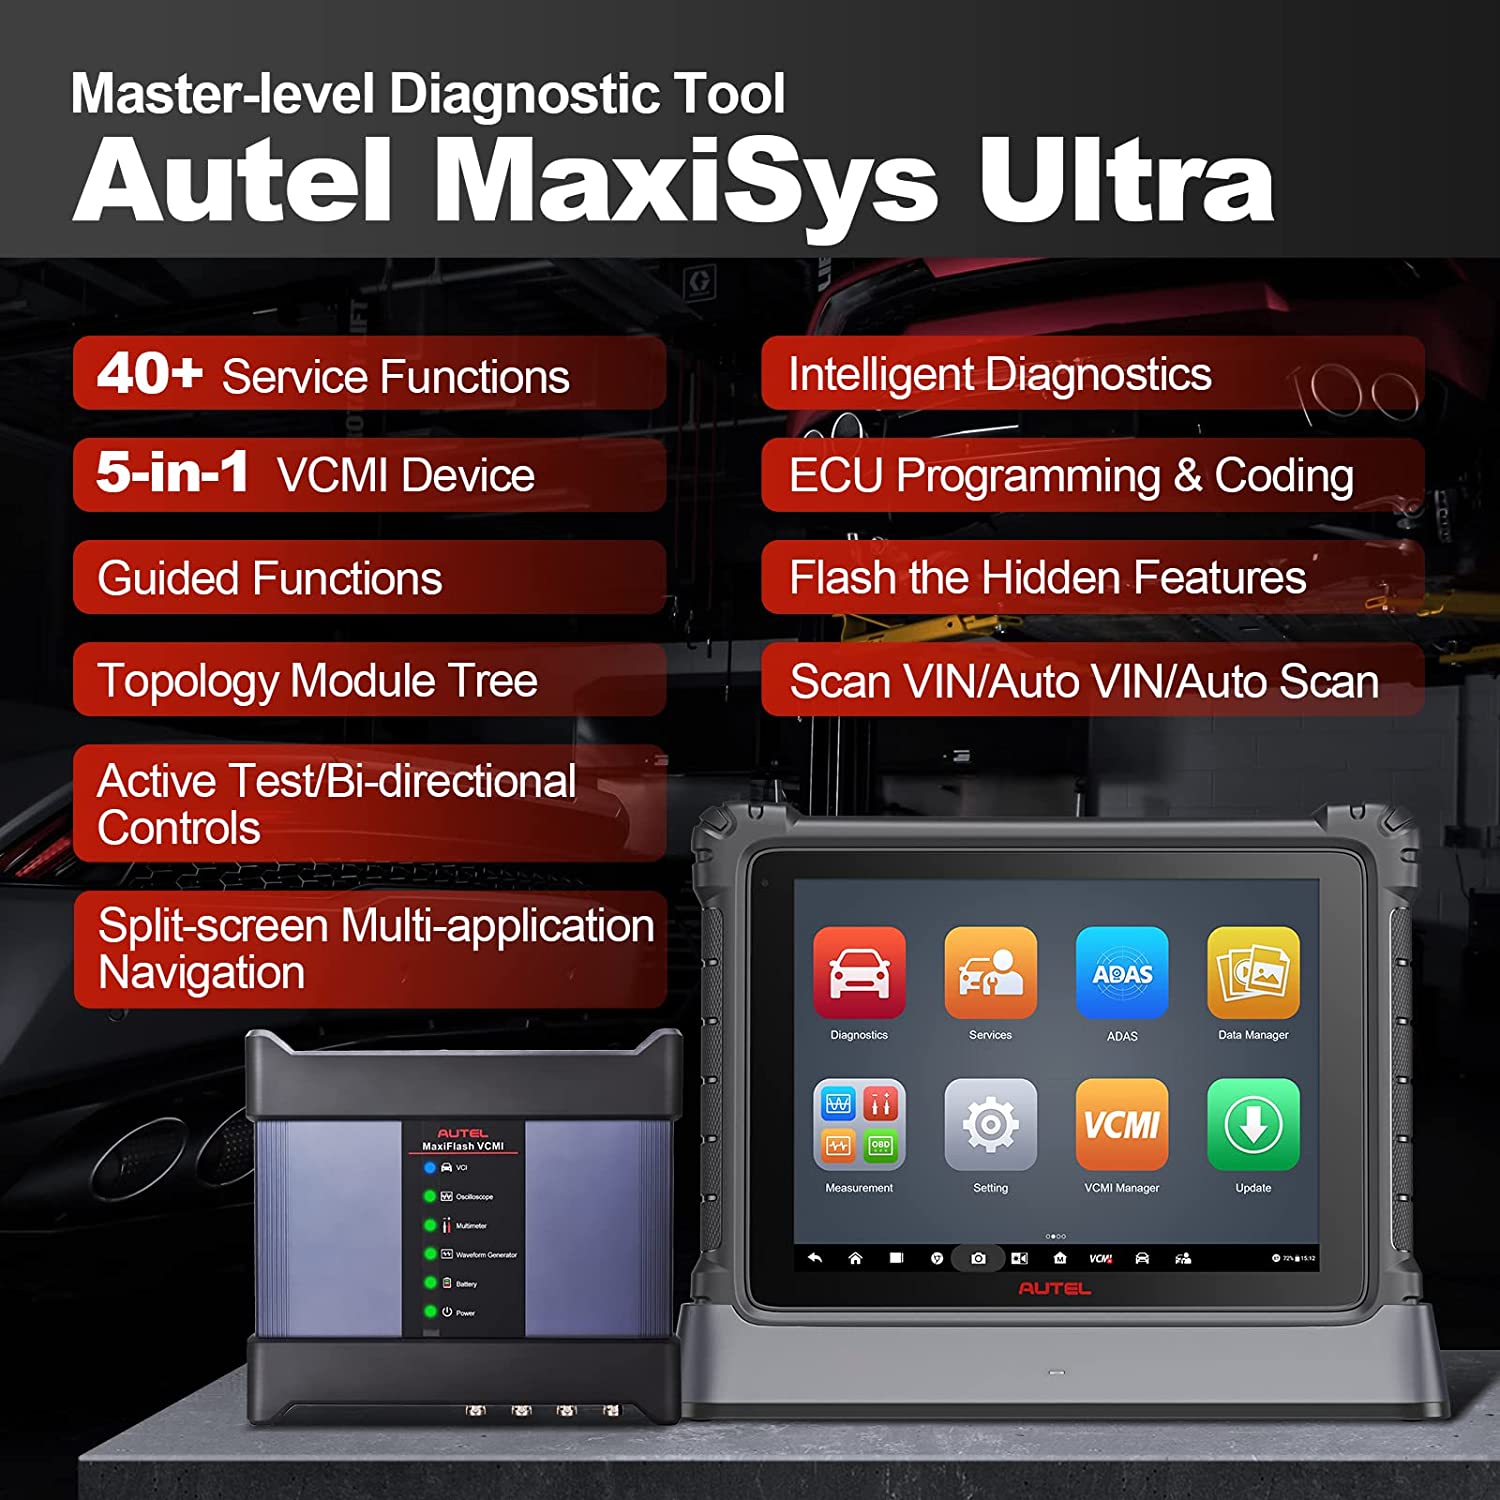 Autel MaxiSys Ultra 5-in-1 VCMI Intelligent OBD II Diagnostic Tool For Car, New OE-Level Functionality with One-stop multitasking Design